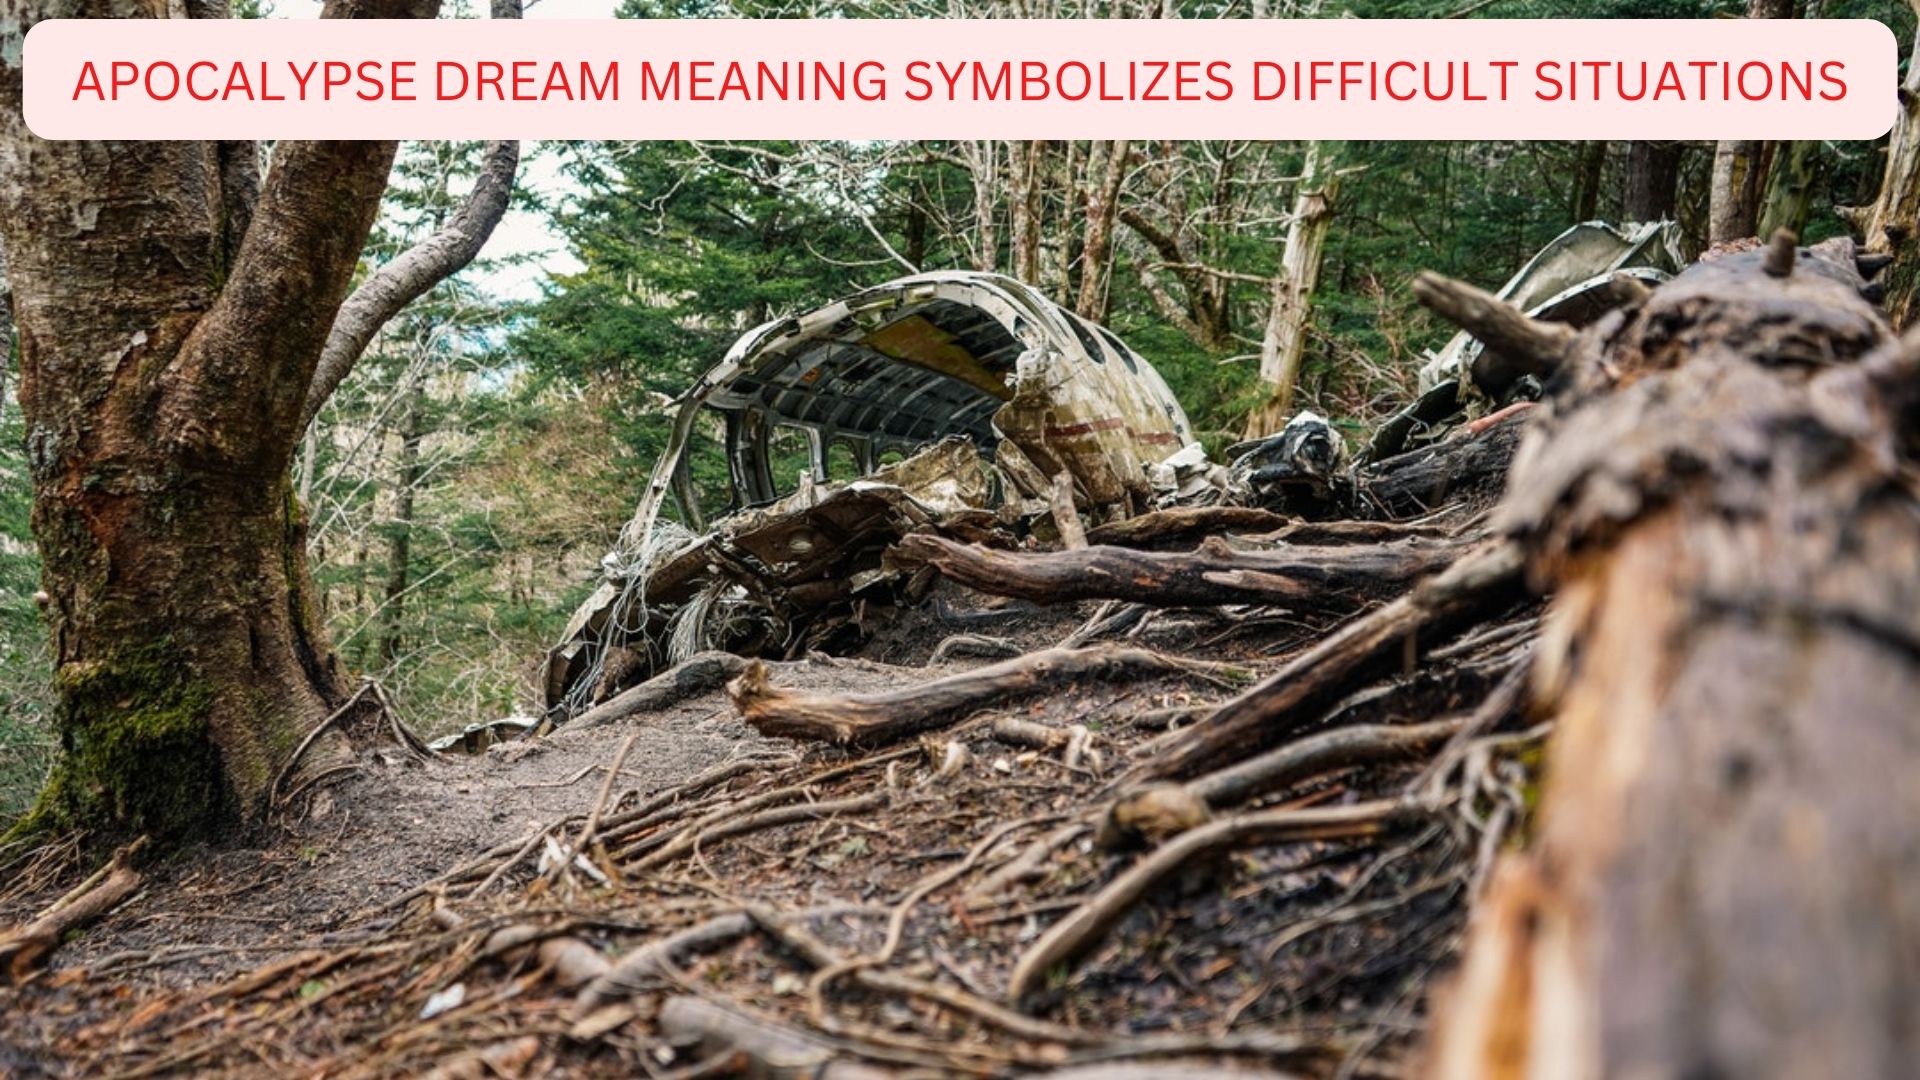 Apocalypse Dream Meaning - Symbolizes Difficult Situations